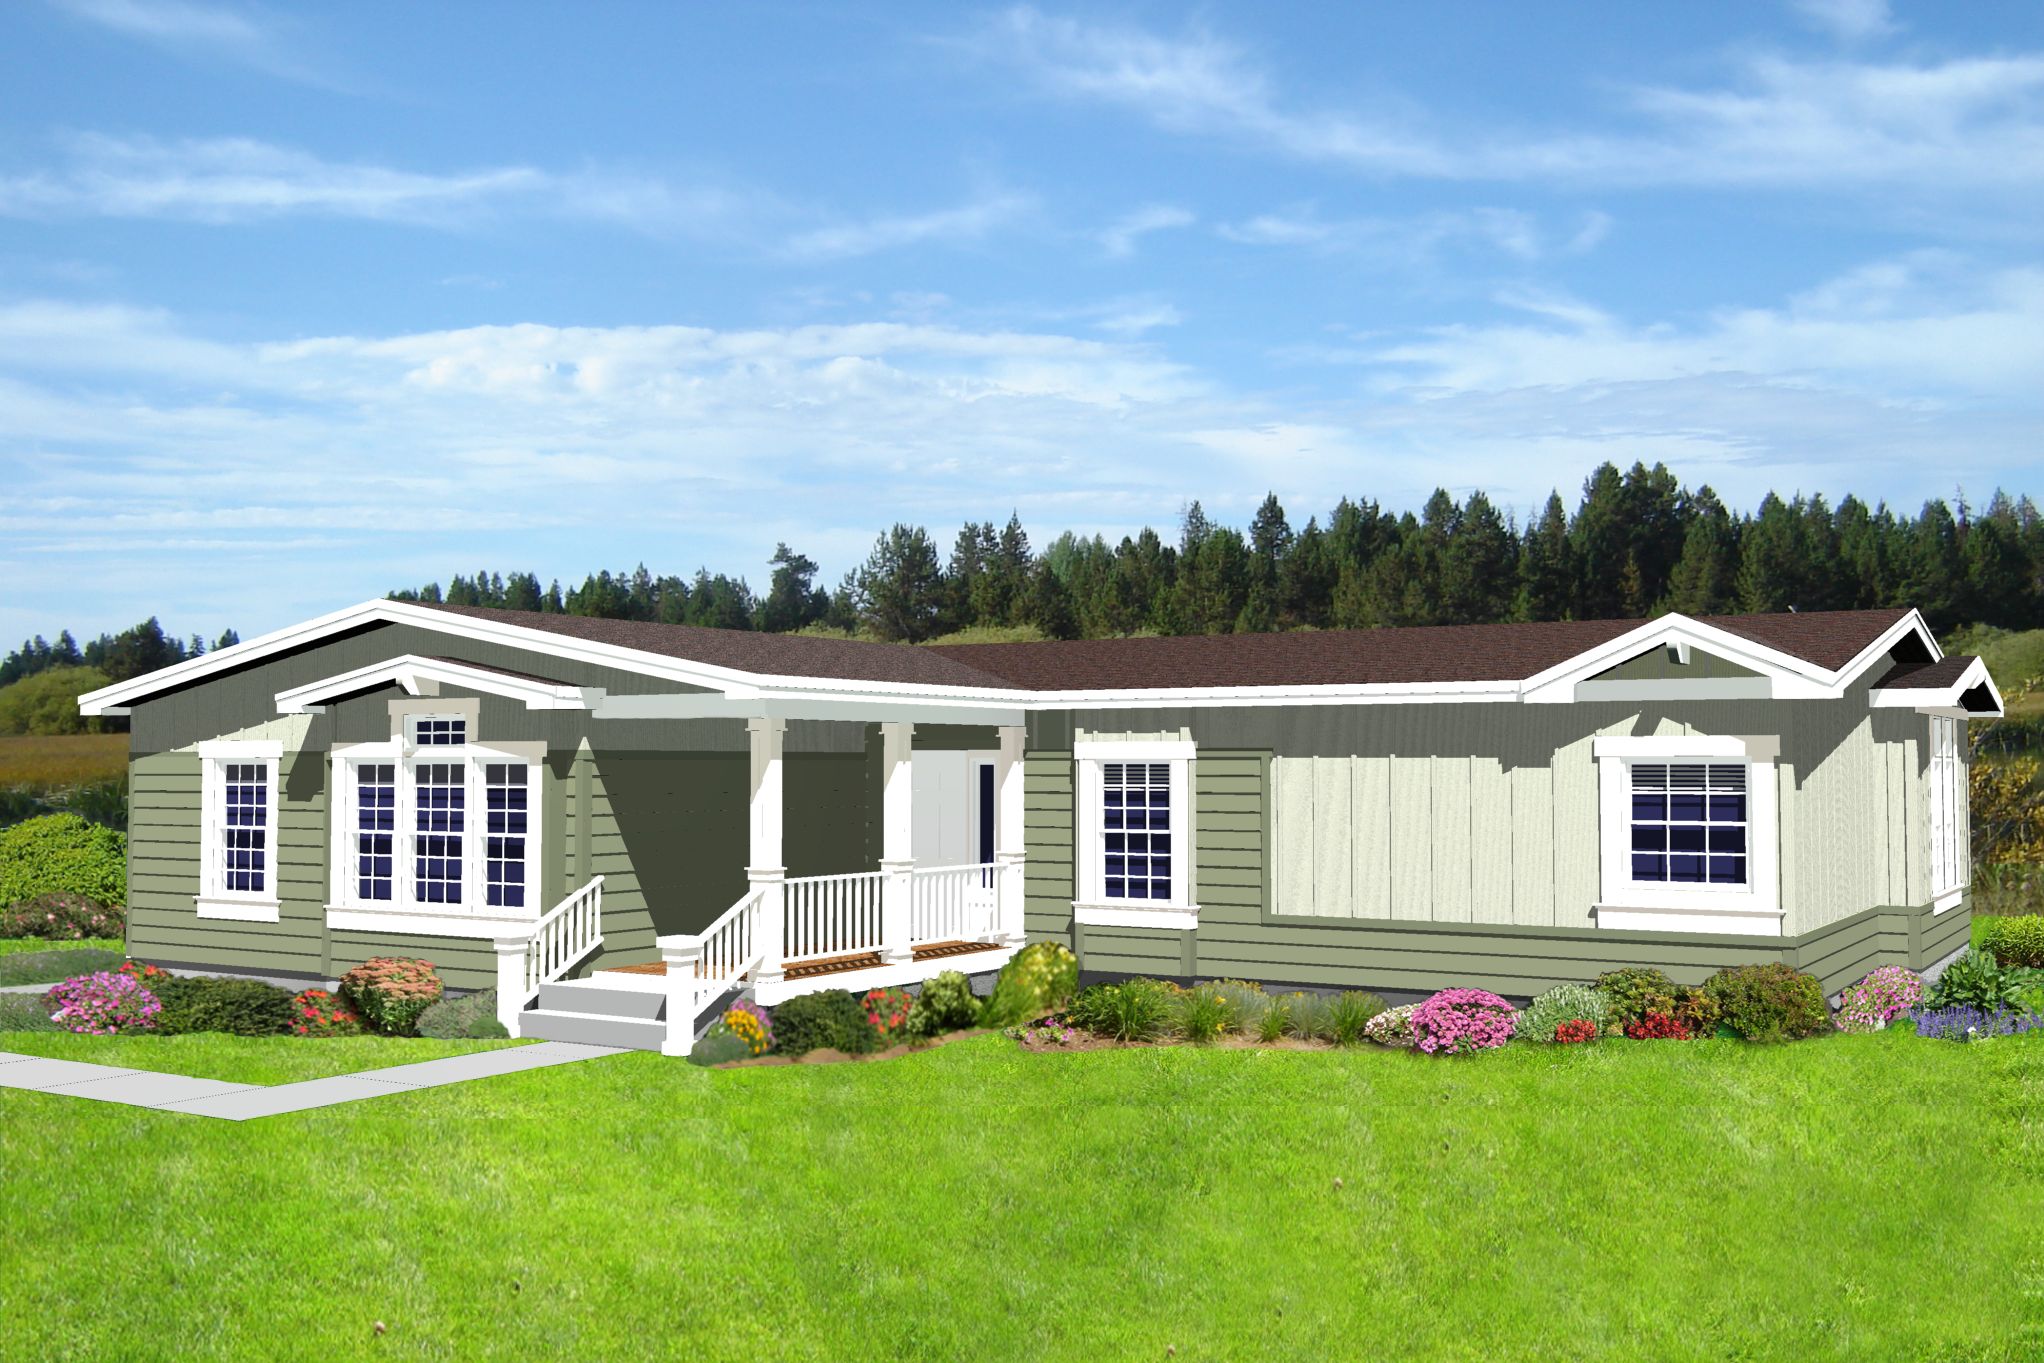 Manufactured and modular homes ranging in size from under 1000 to over 3000 square feet of living space